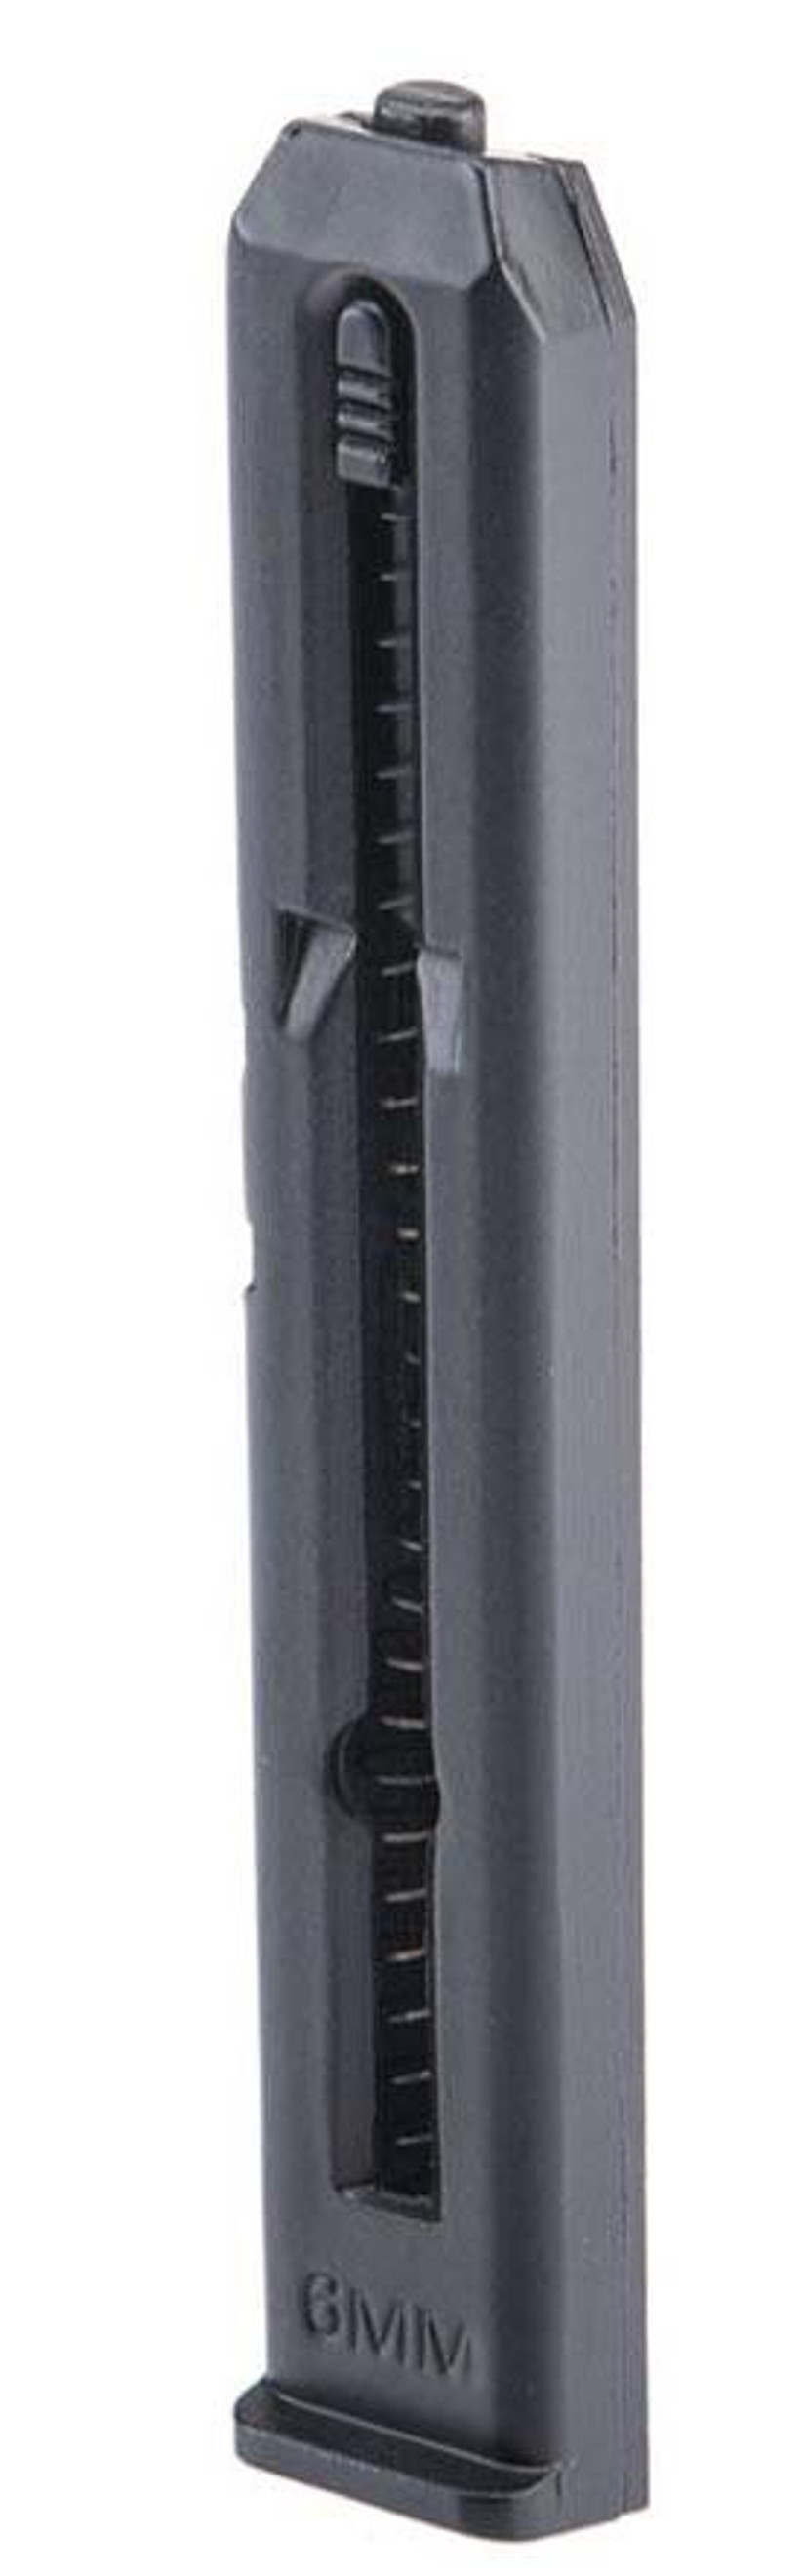 Elite Force Universal 15 Round Stick Magazine for CO2 Non-Blowback Gas Airsoft Pistols